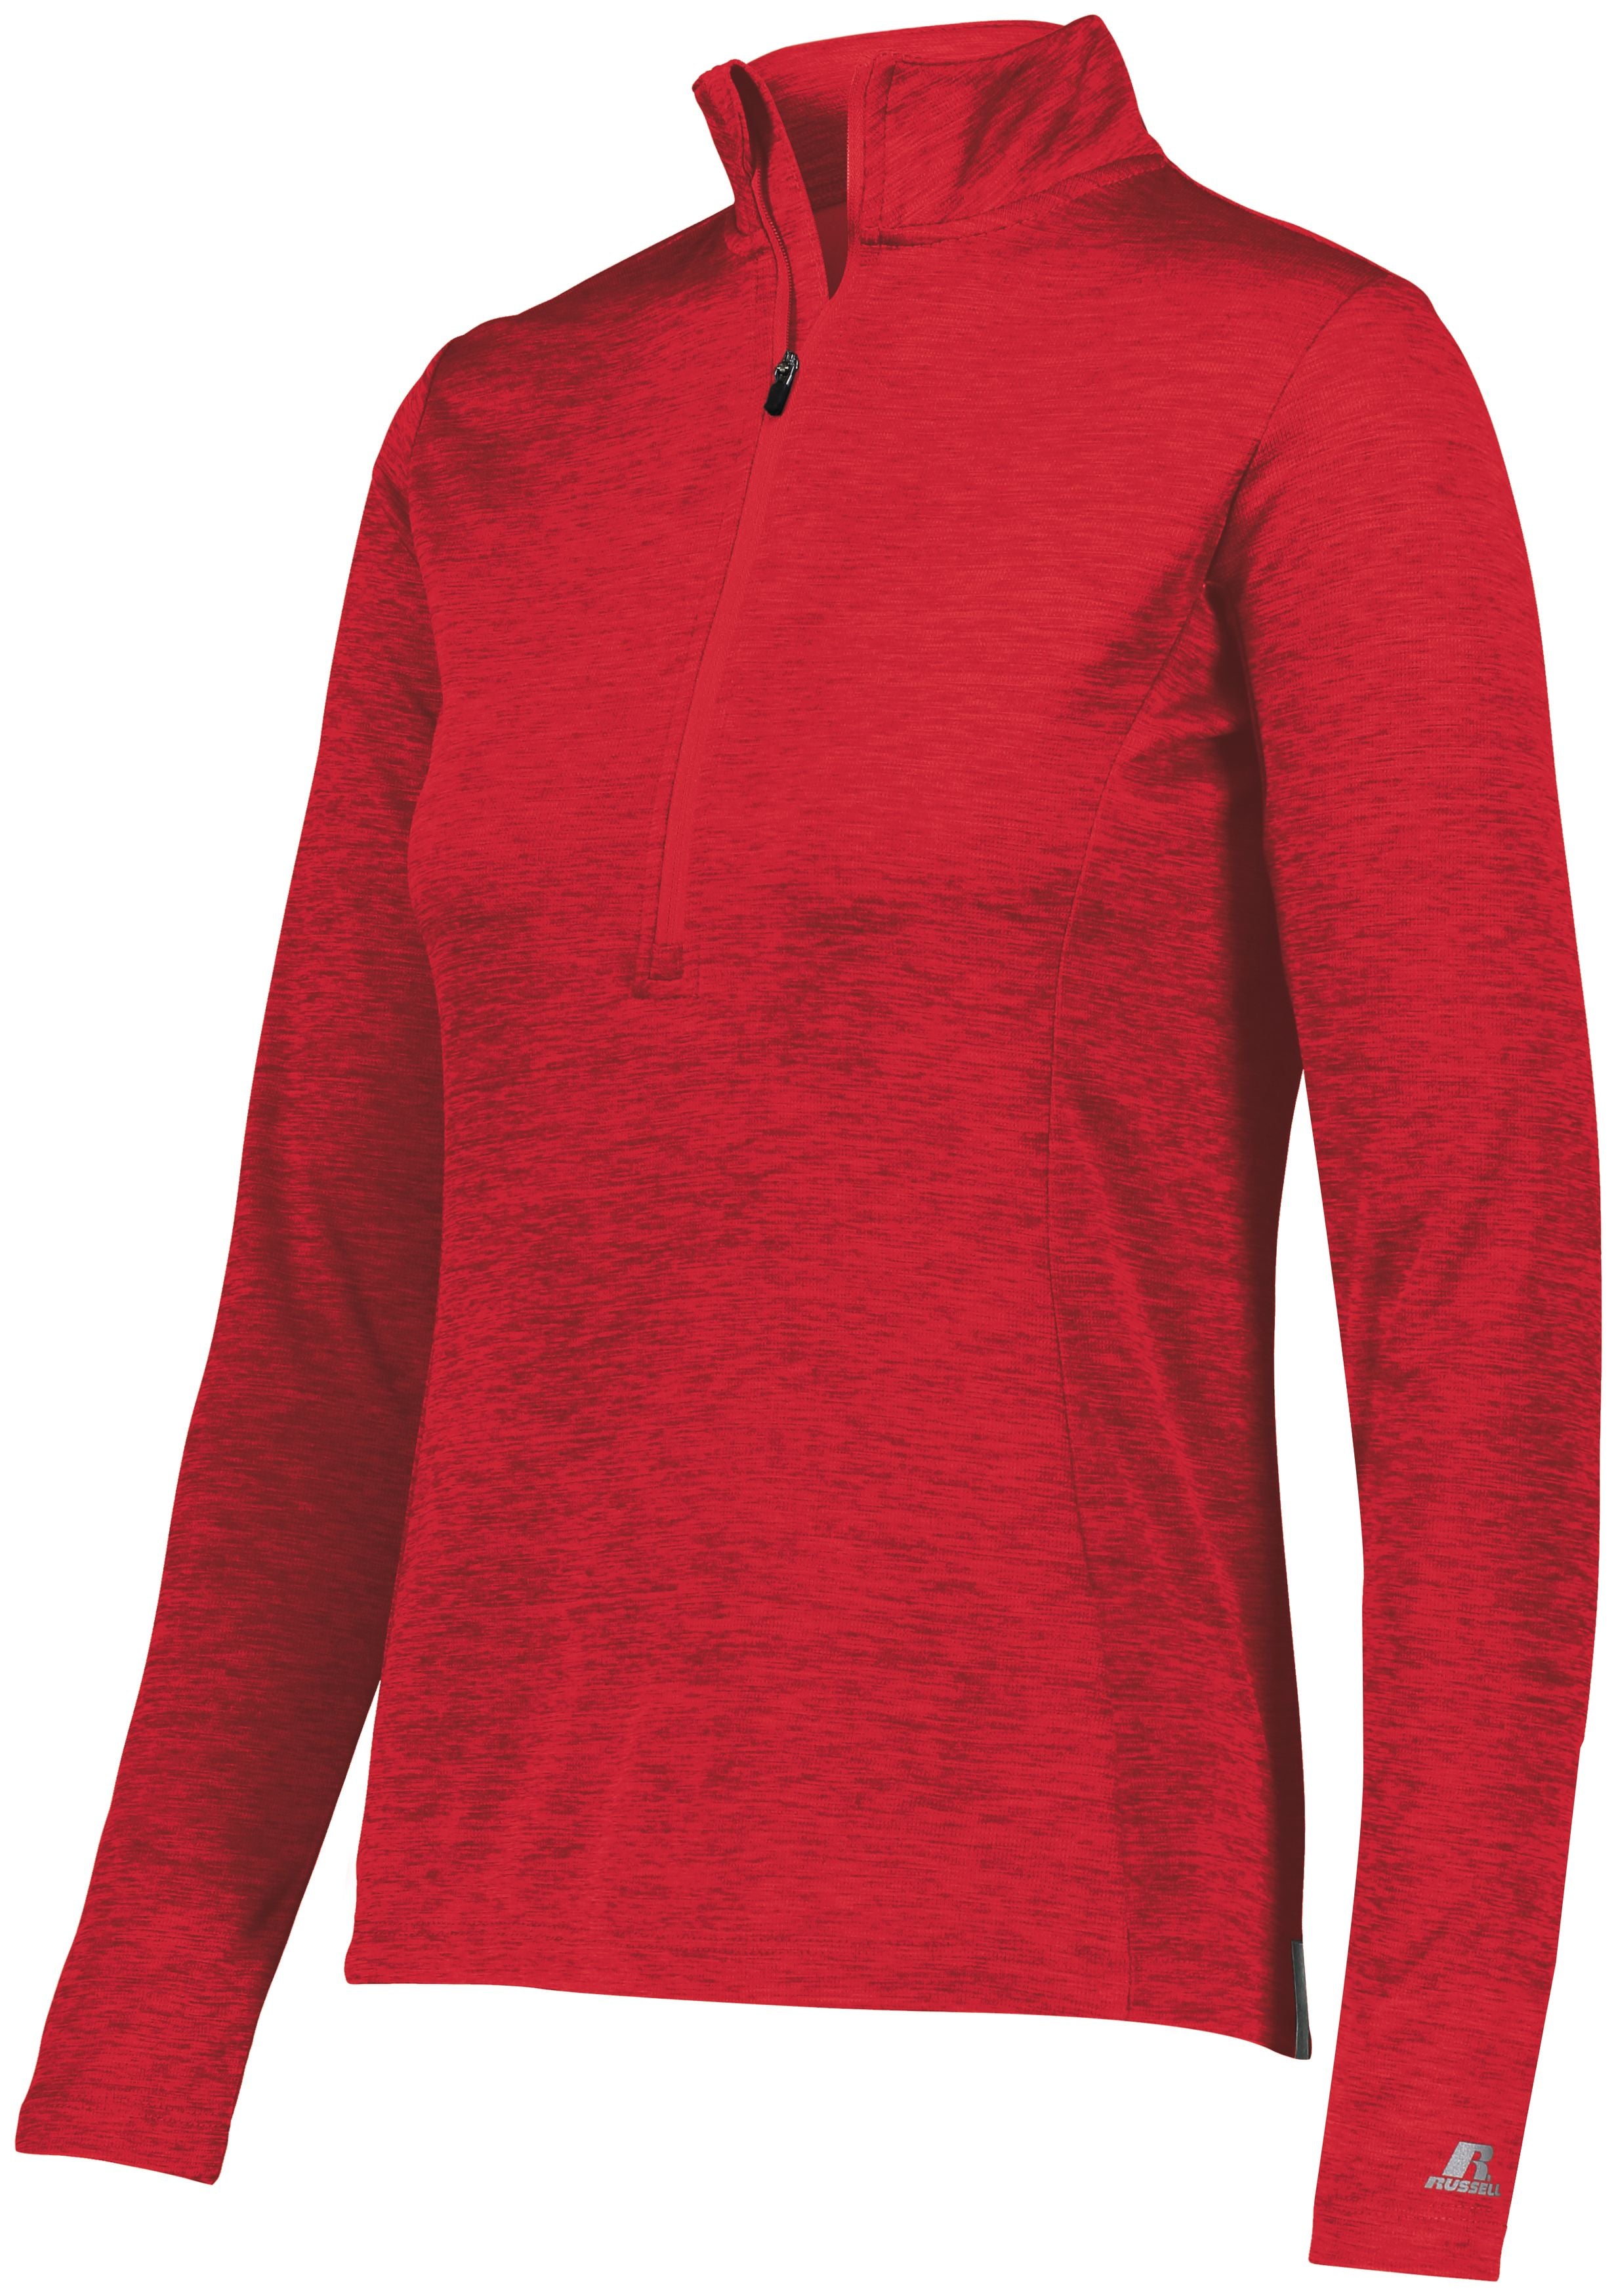 Russell Athletic Ladies Dri-Power Lightweight 1/4 Zip Pullover in True Red  -Part of the Ladies, Russell-Athletic-Products, Shirts product lines at KanaleyCreations.com